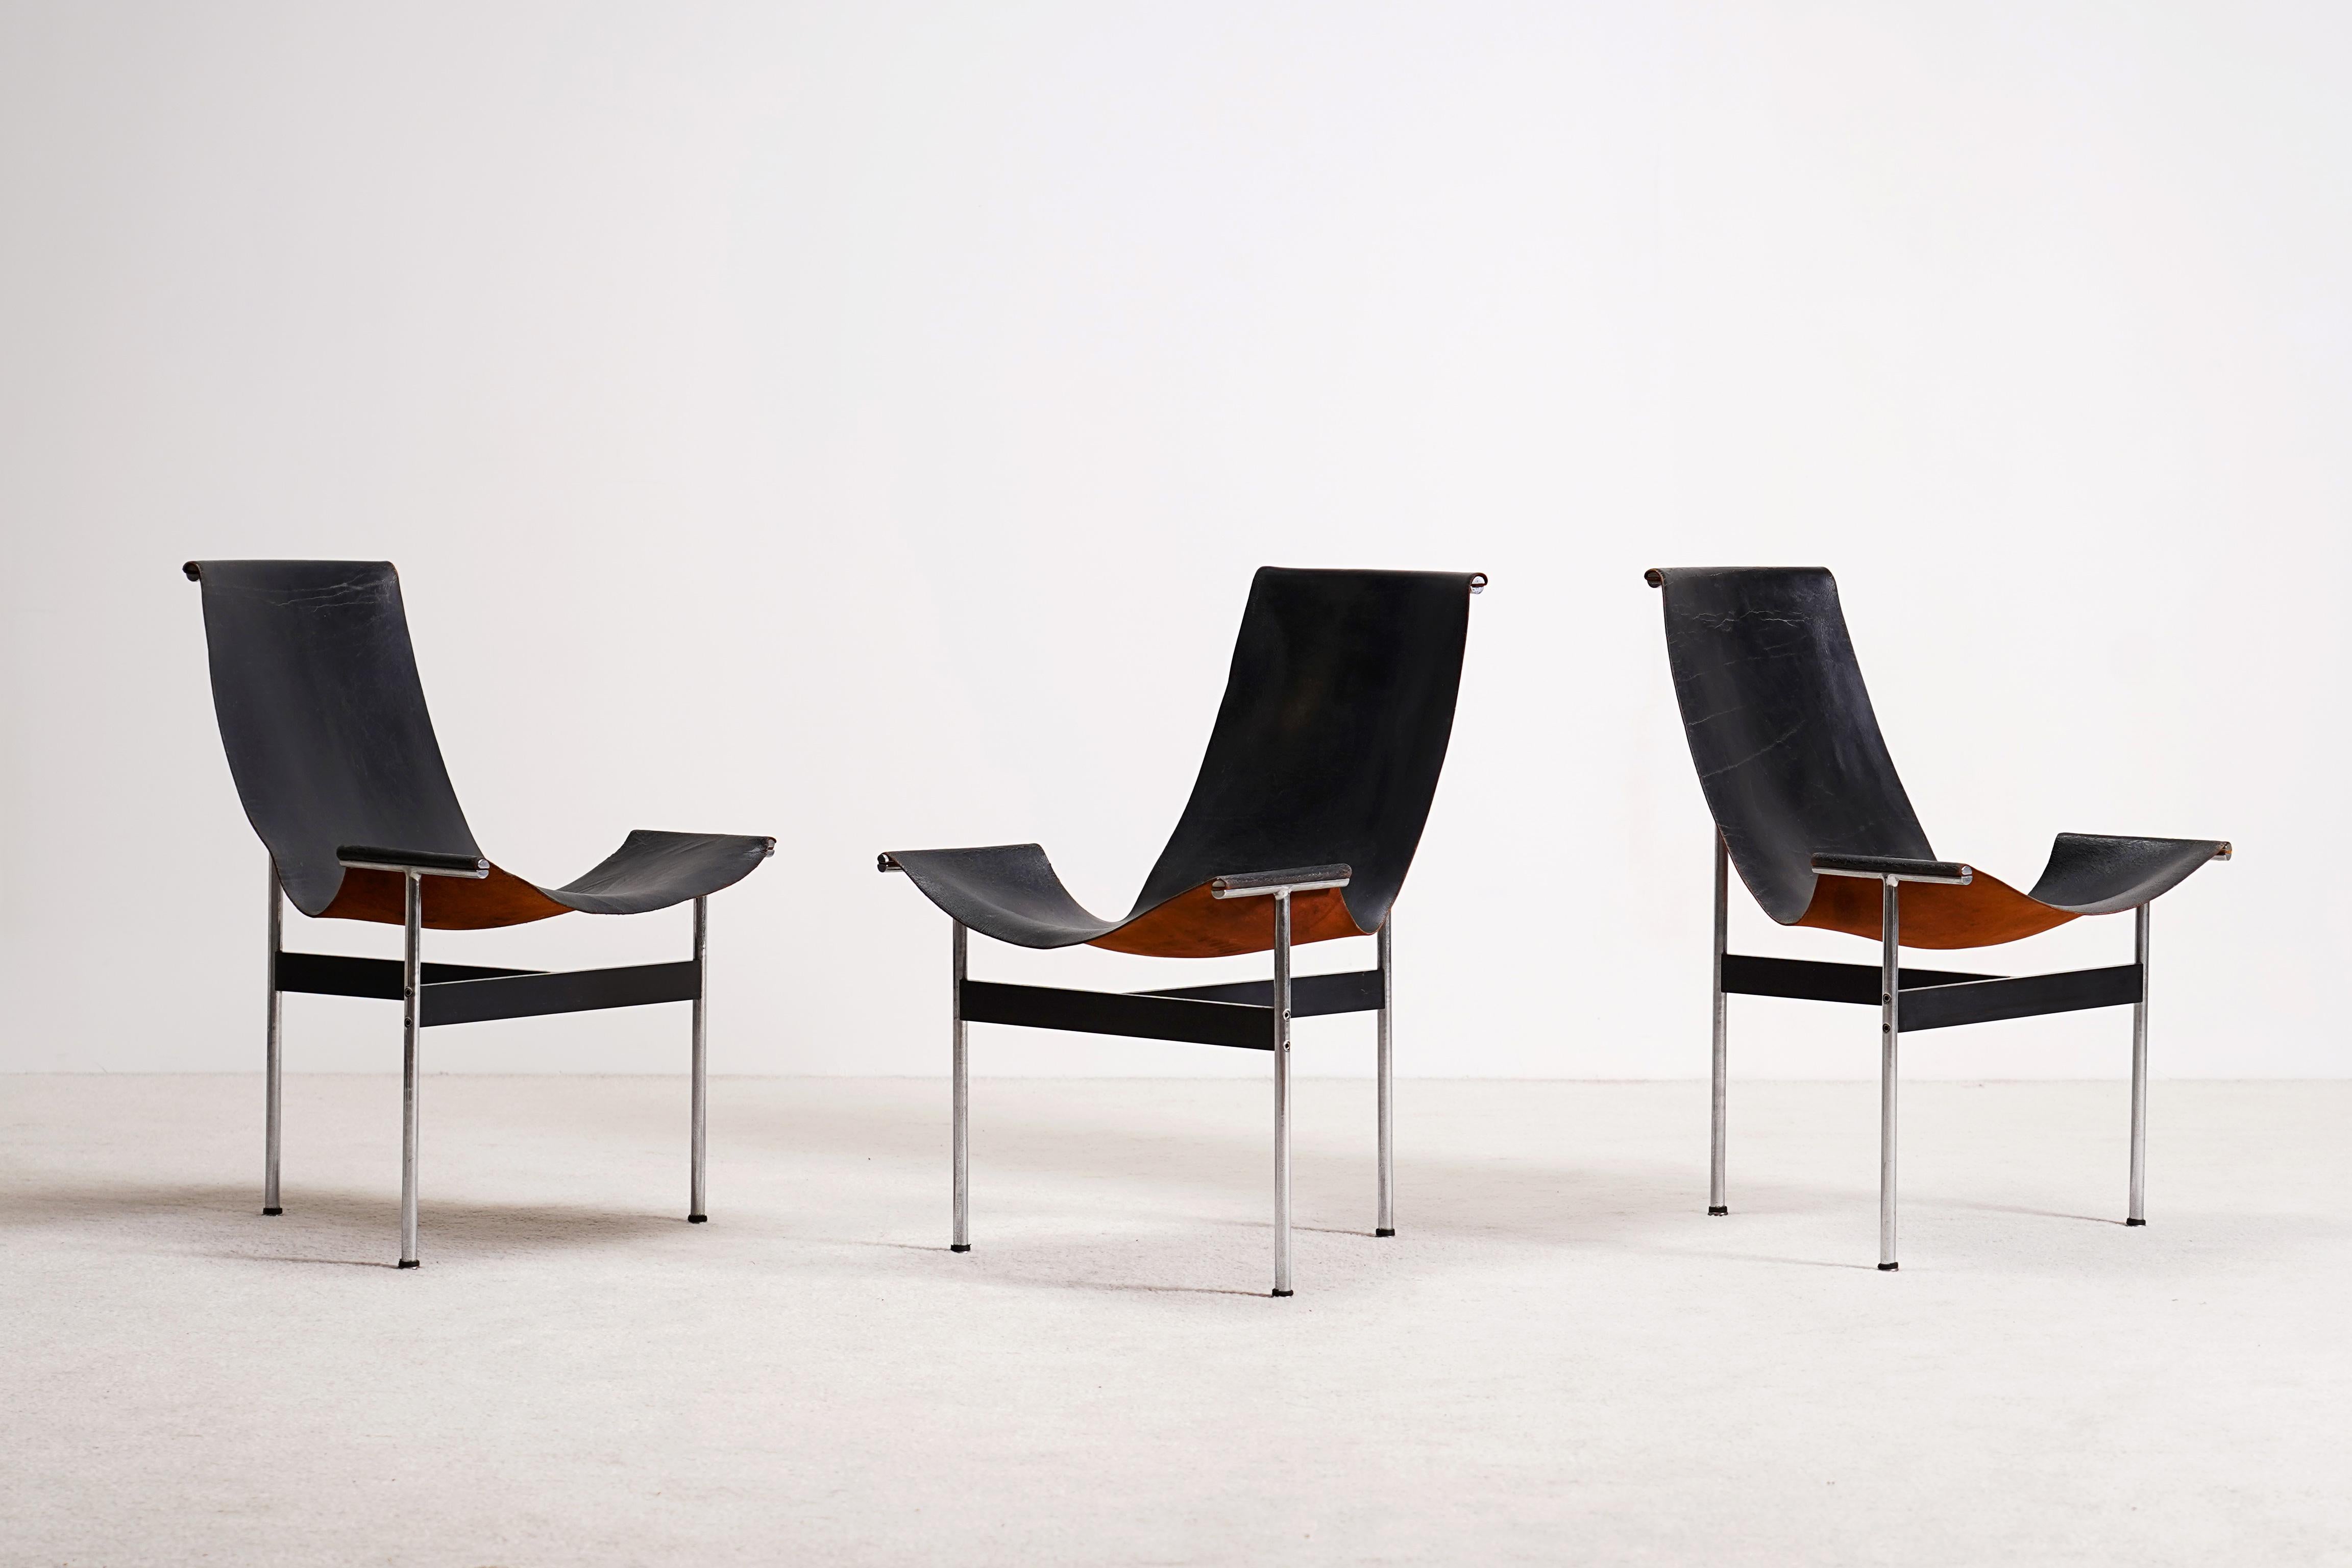 Set of 3 three-legged chairs, model T-Chair, designed by Katavolos, Kelley and Littell in 1952 / 1953. Three T-shaped steel legs hold the black leather in place. The leather is connected to the frame on three points only resulting in an elegant